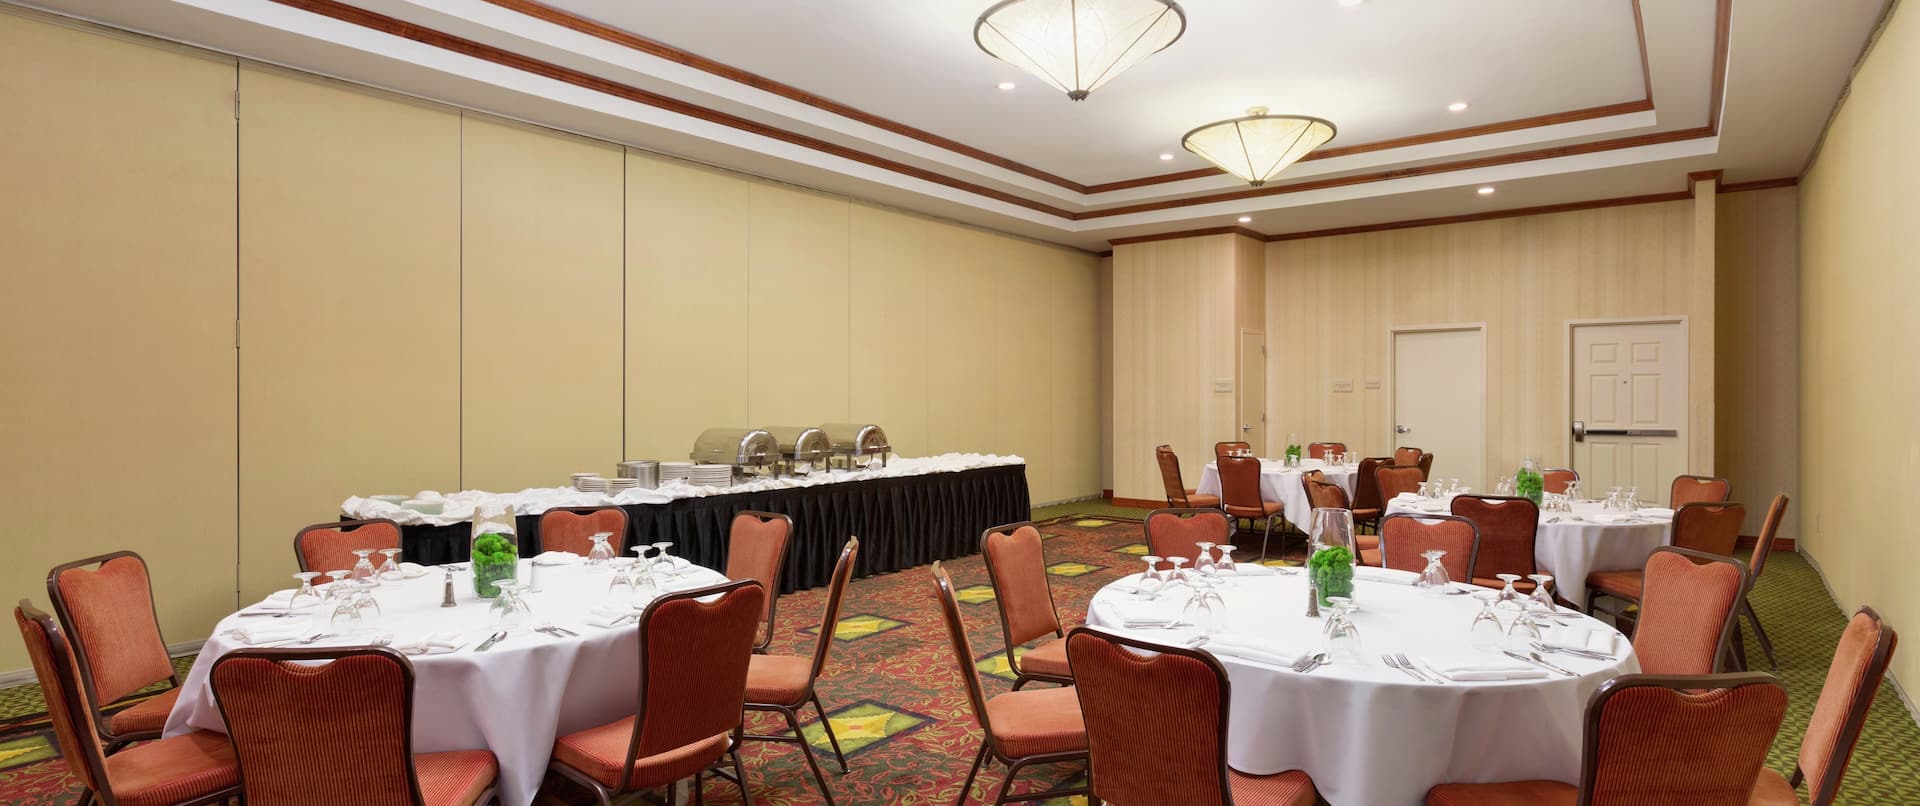 Meeting Room with Banquet Tables